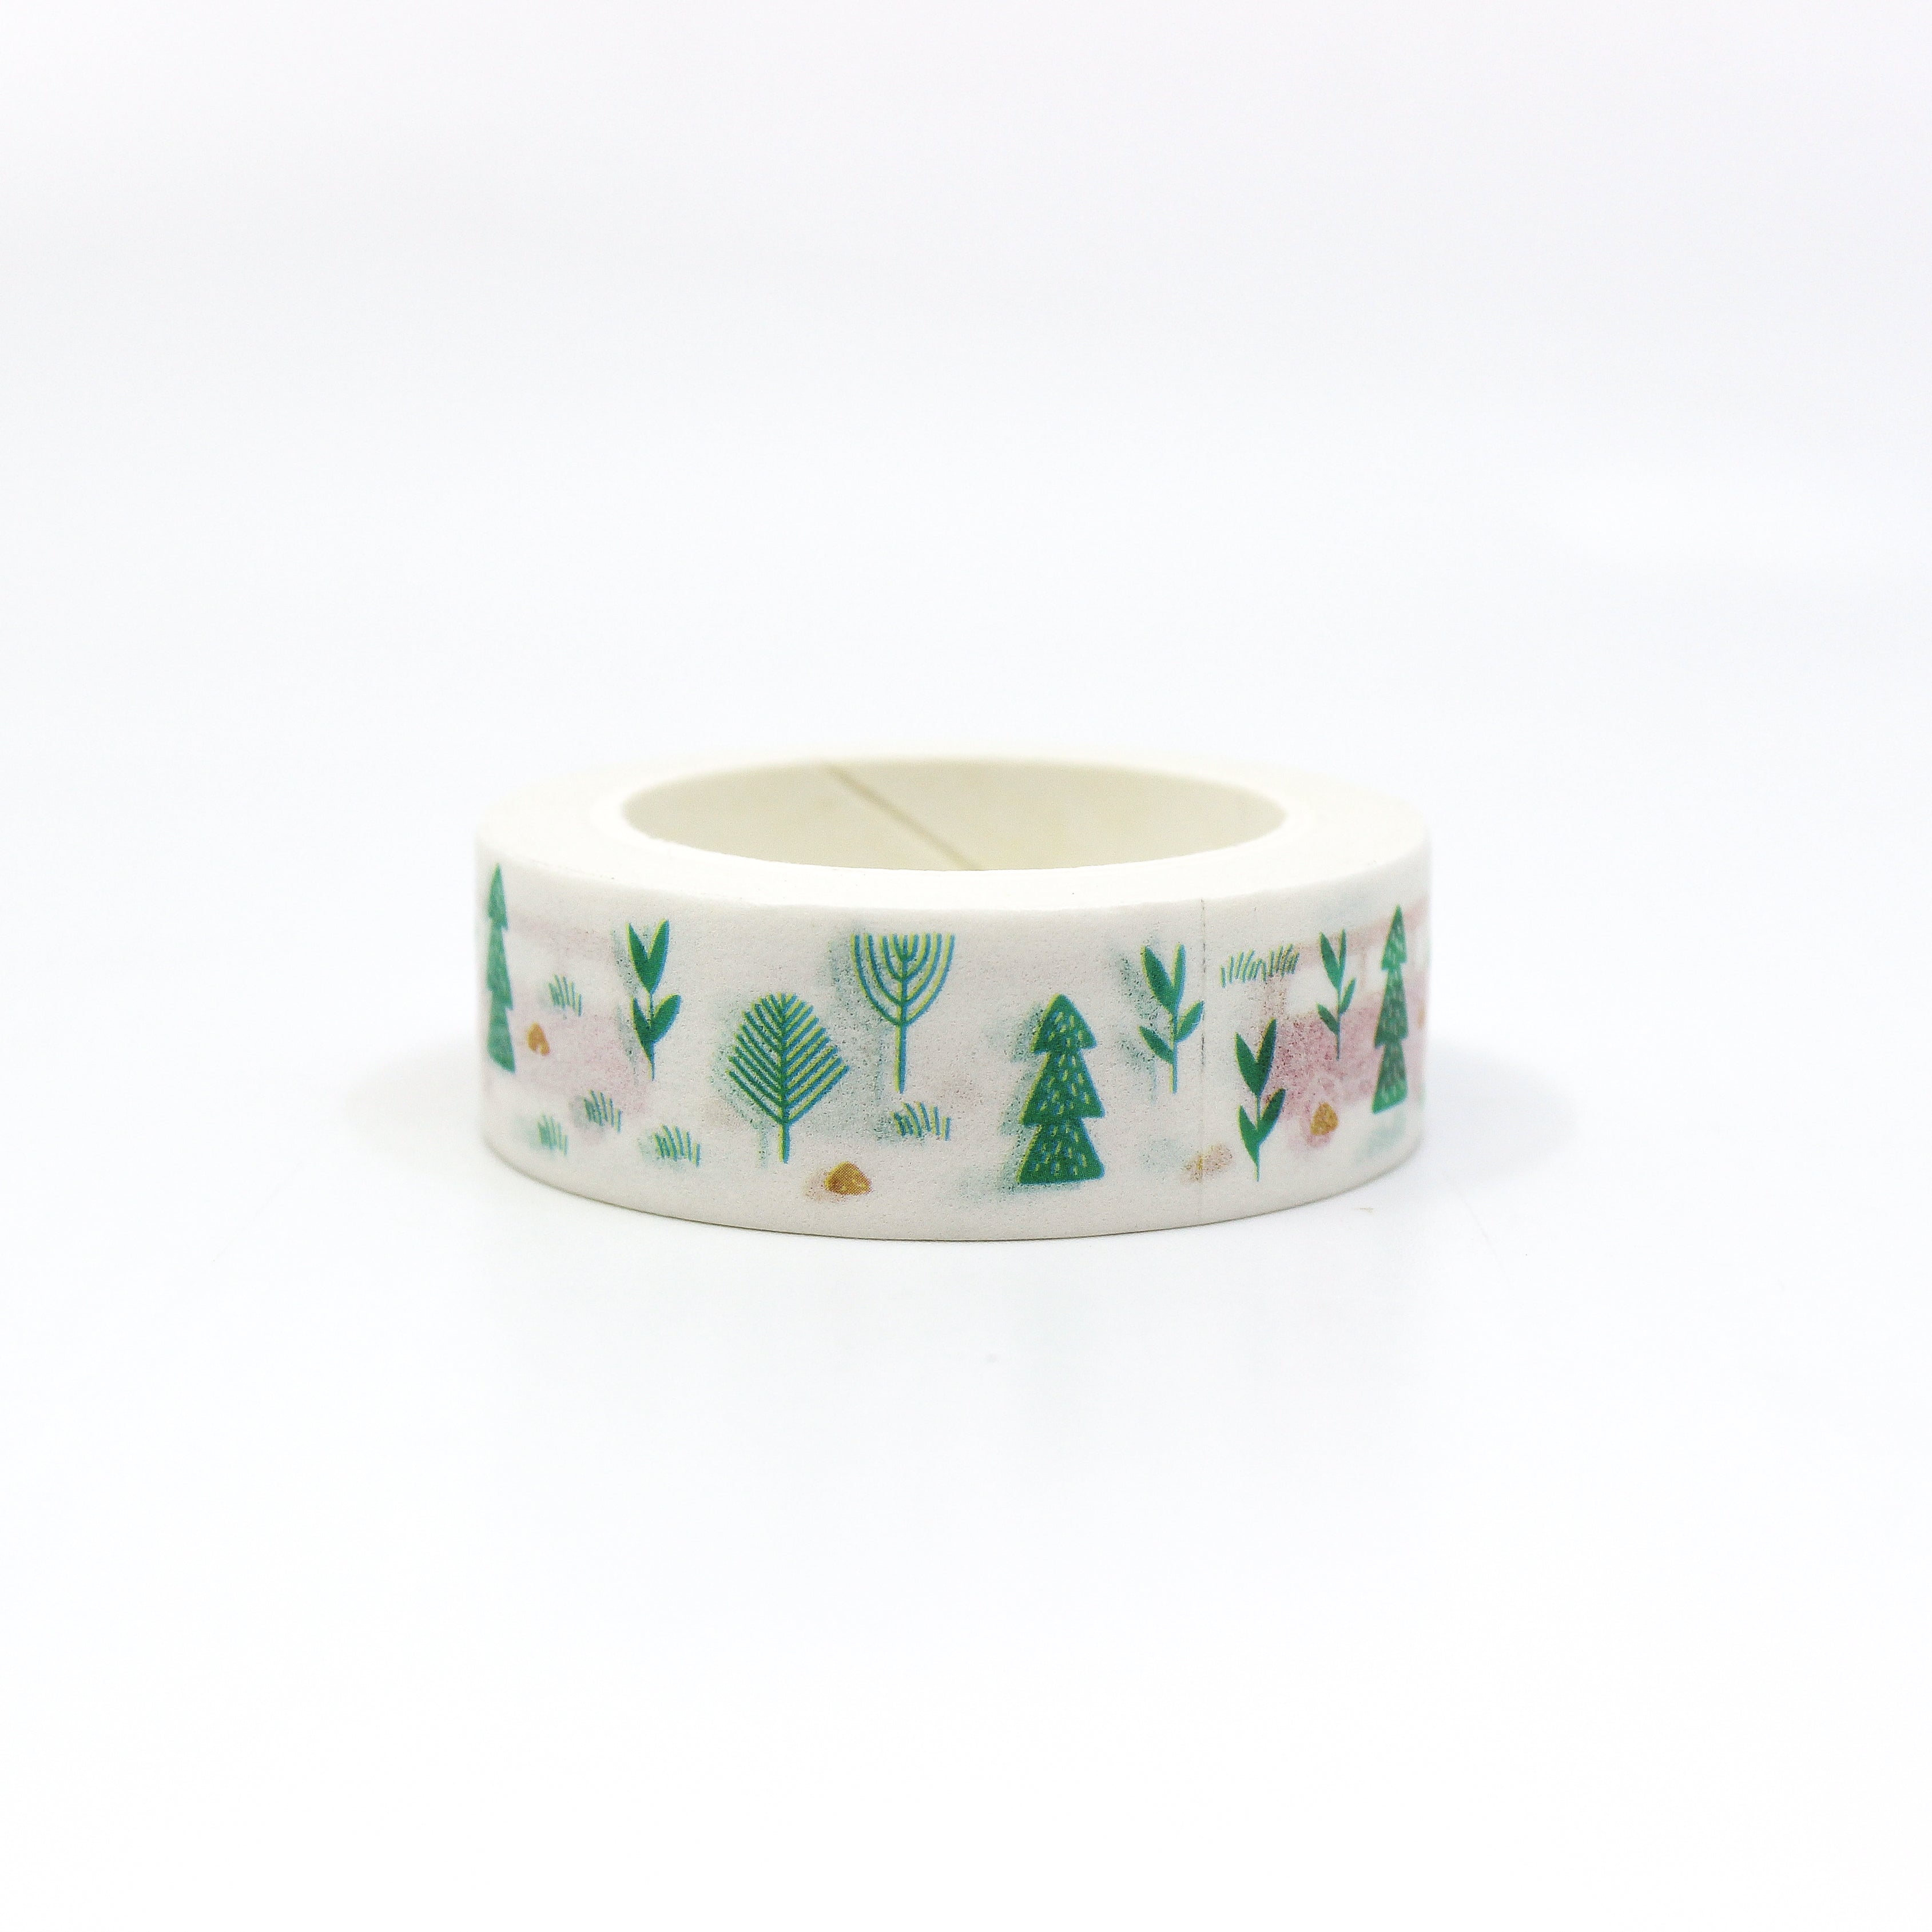 This shows the forest scape on this fun travel pattern themed view of washi tape from BBB Supplies Craft Shop